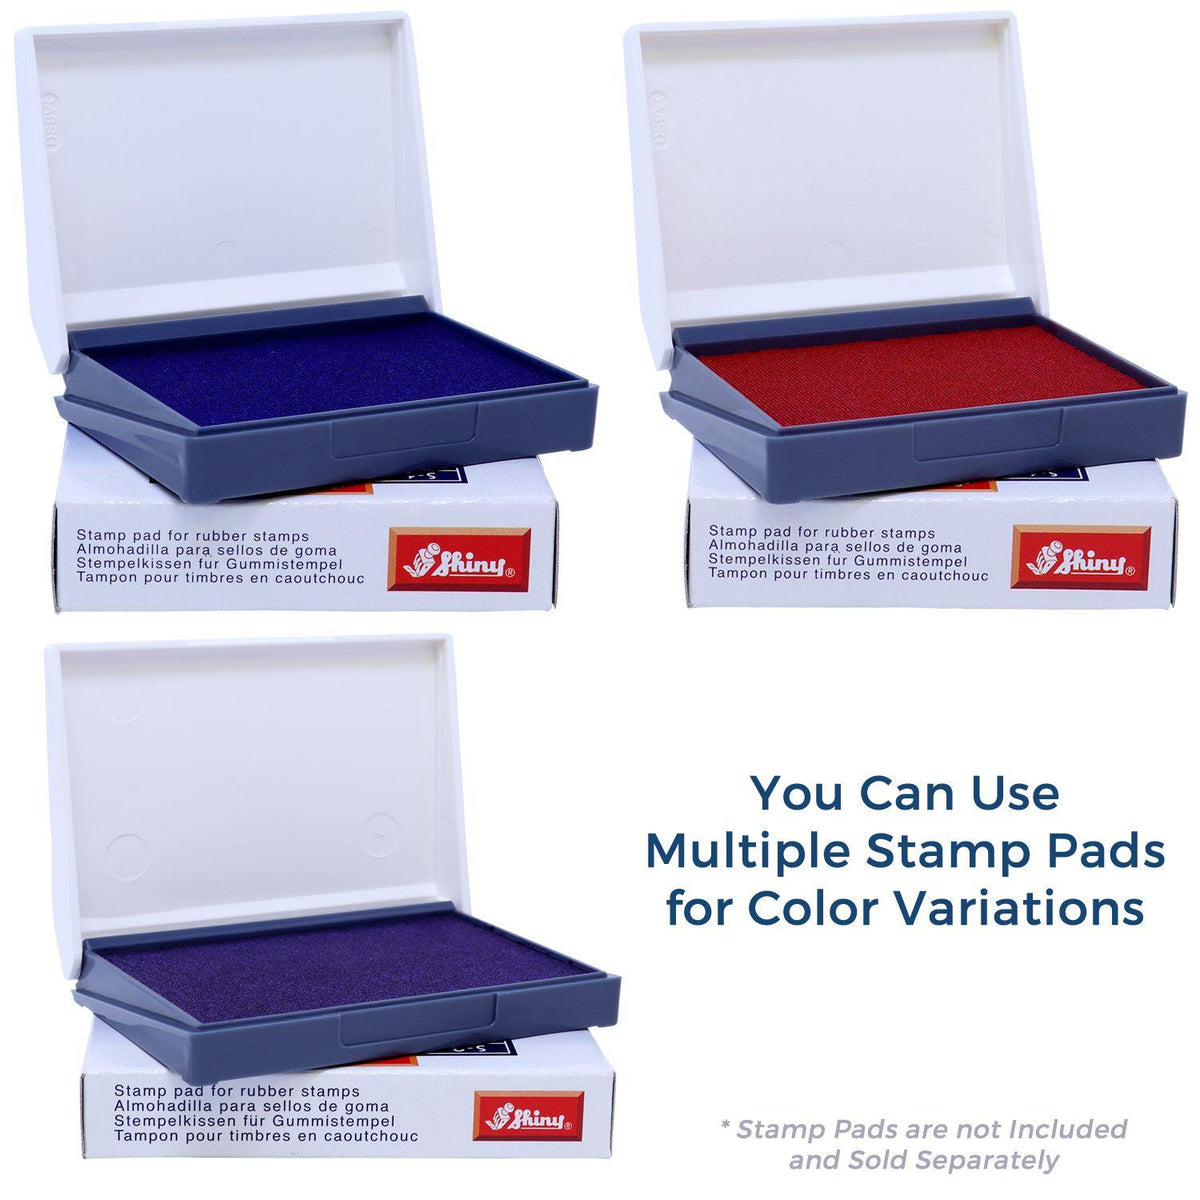 Stamp Pads for Large Printed Matter Rubber Stamp Available